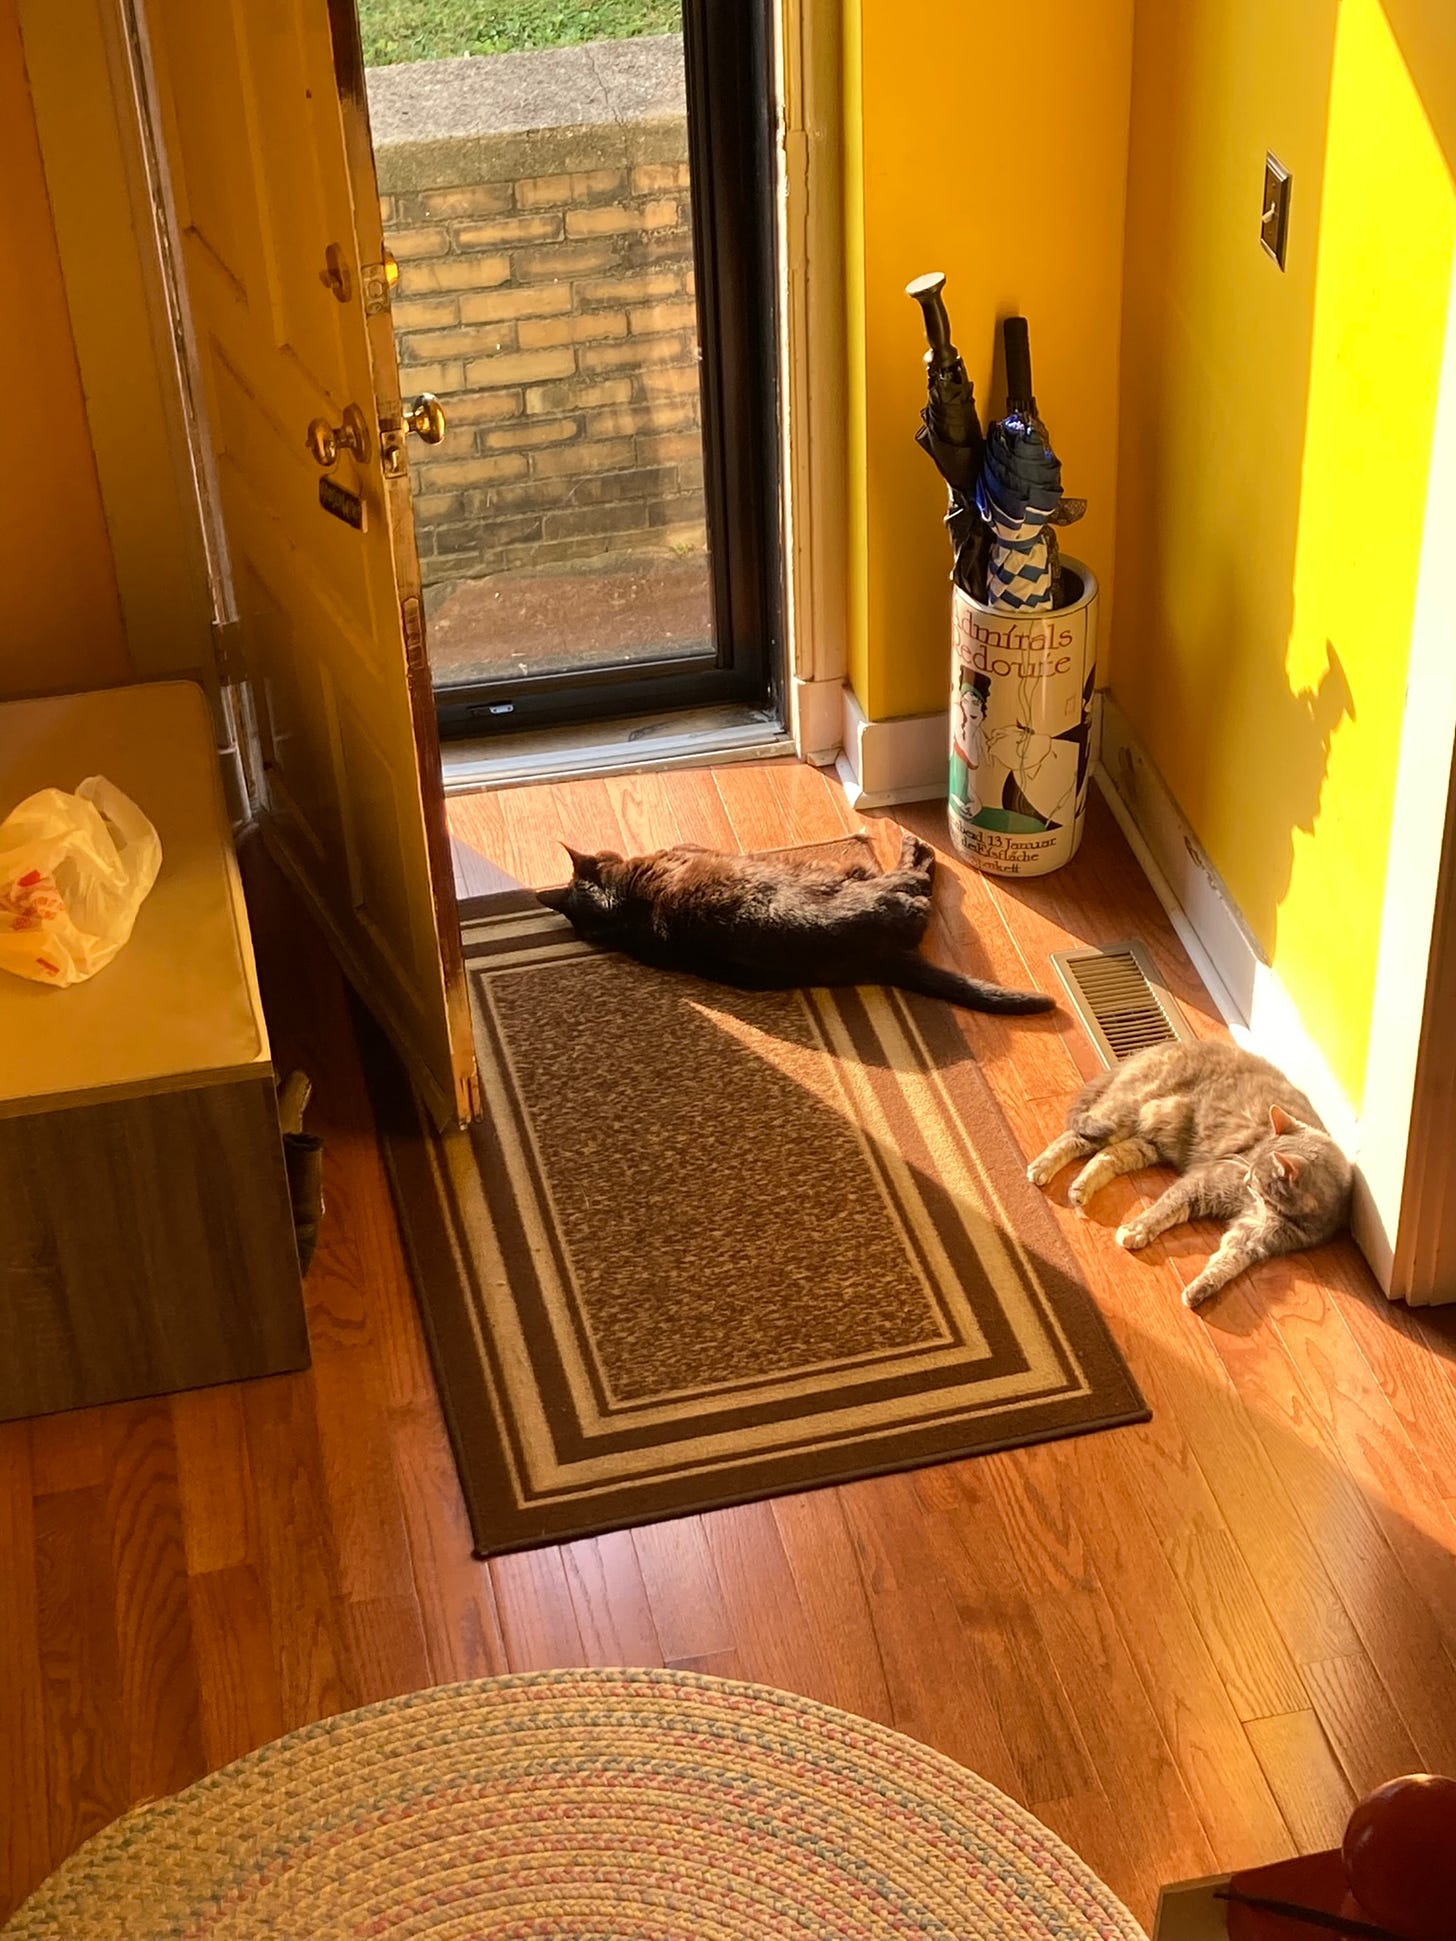 Two cats sitting in a slant of sunlight in the front door, one big, fat and black and the other a small, gray tabby.